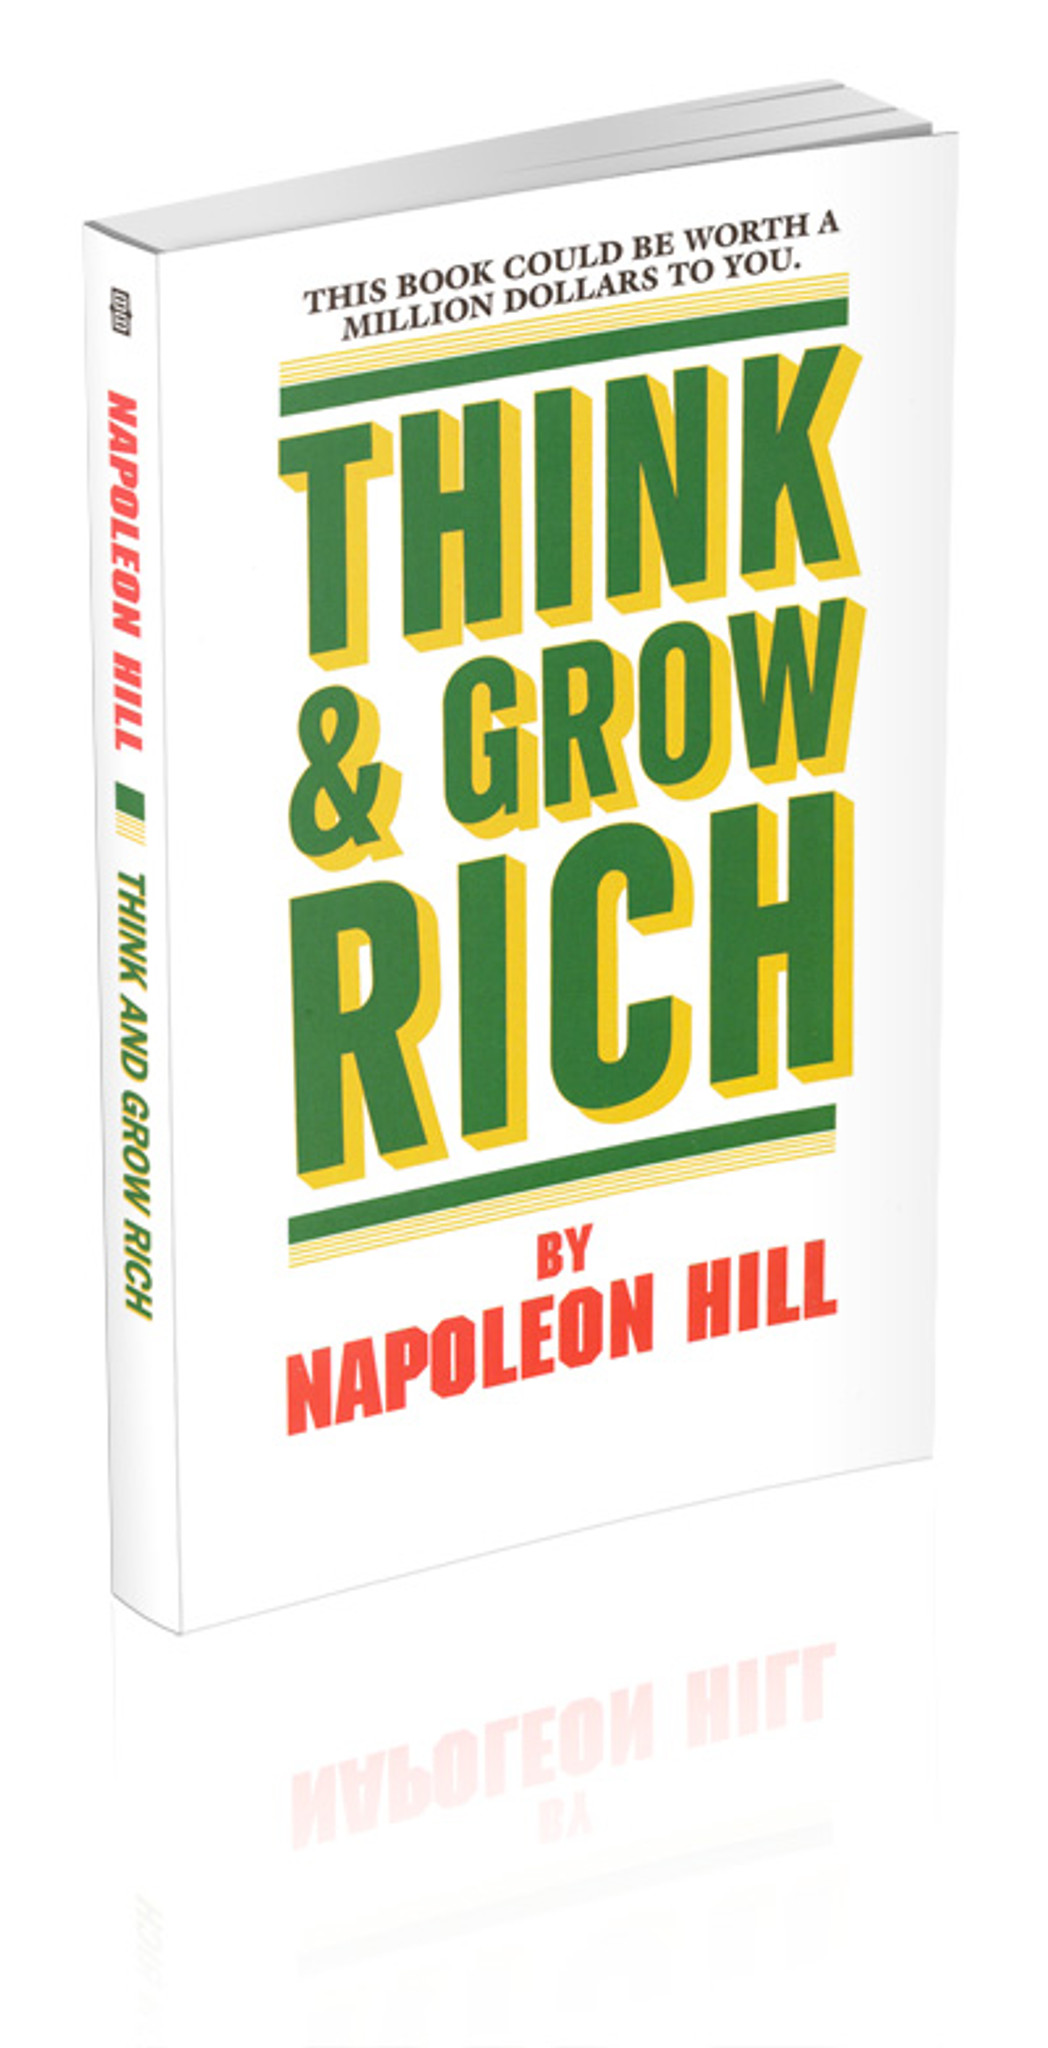 think and grow rich by napoleon hill book review